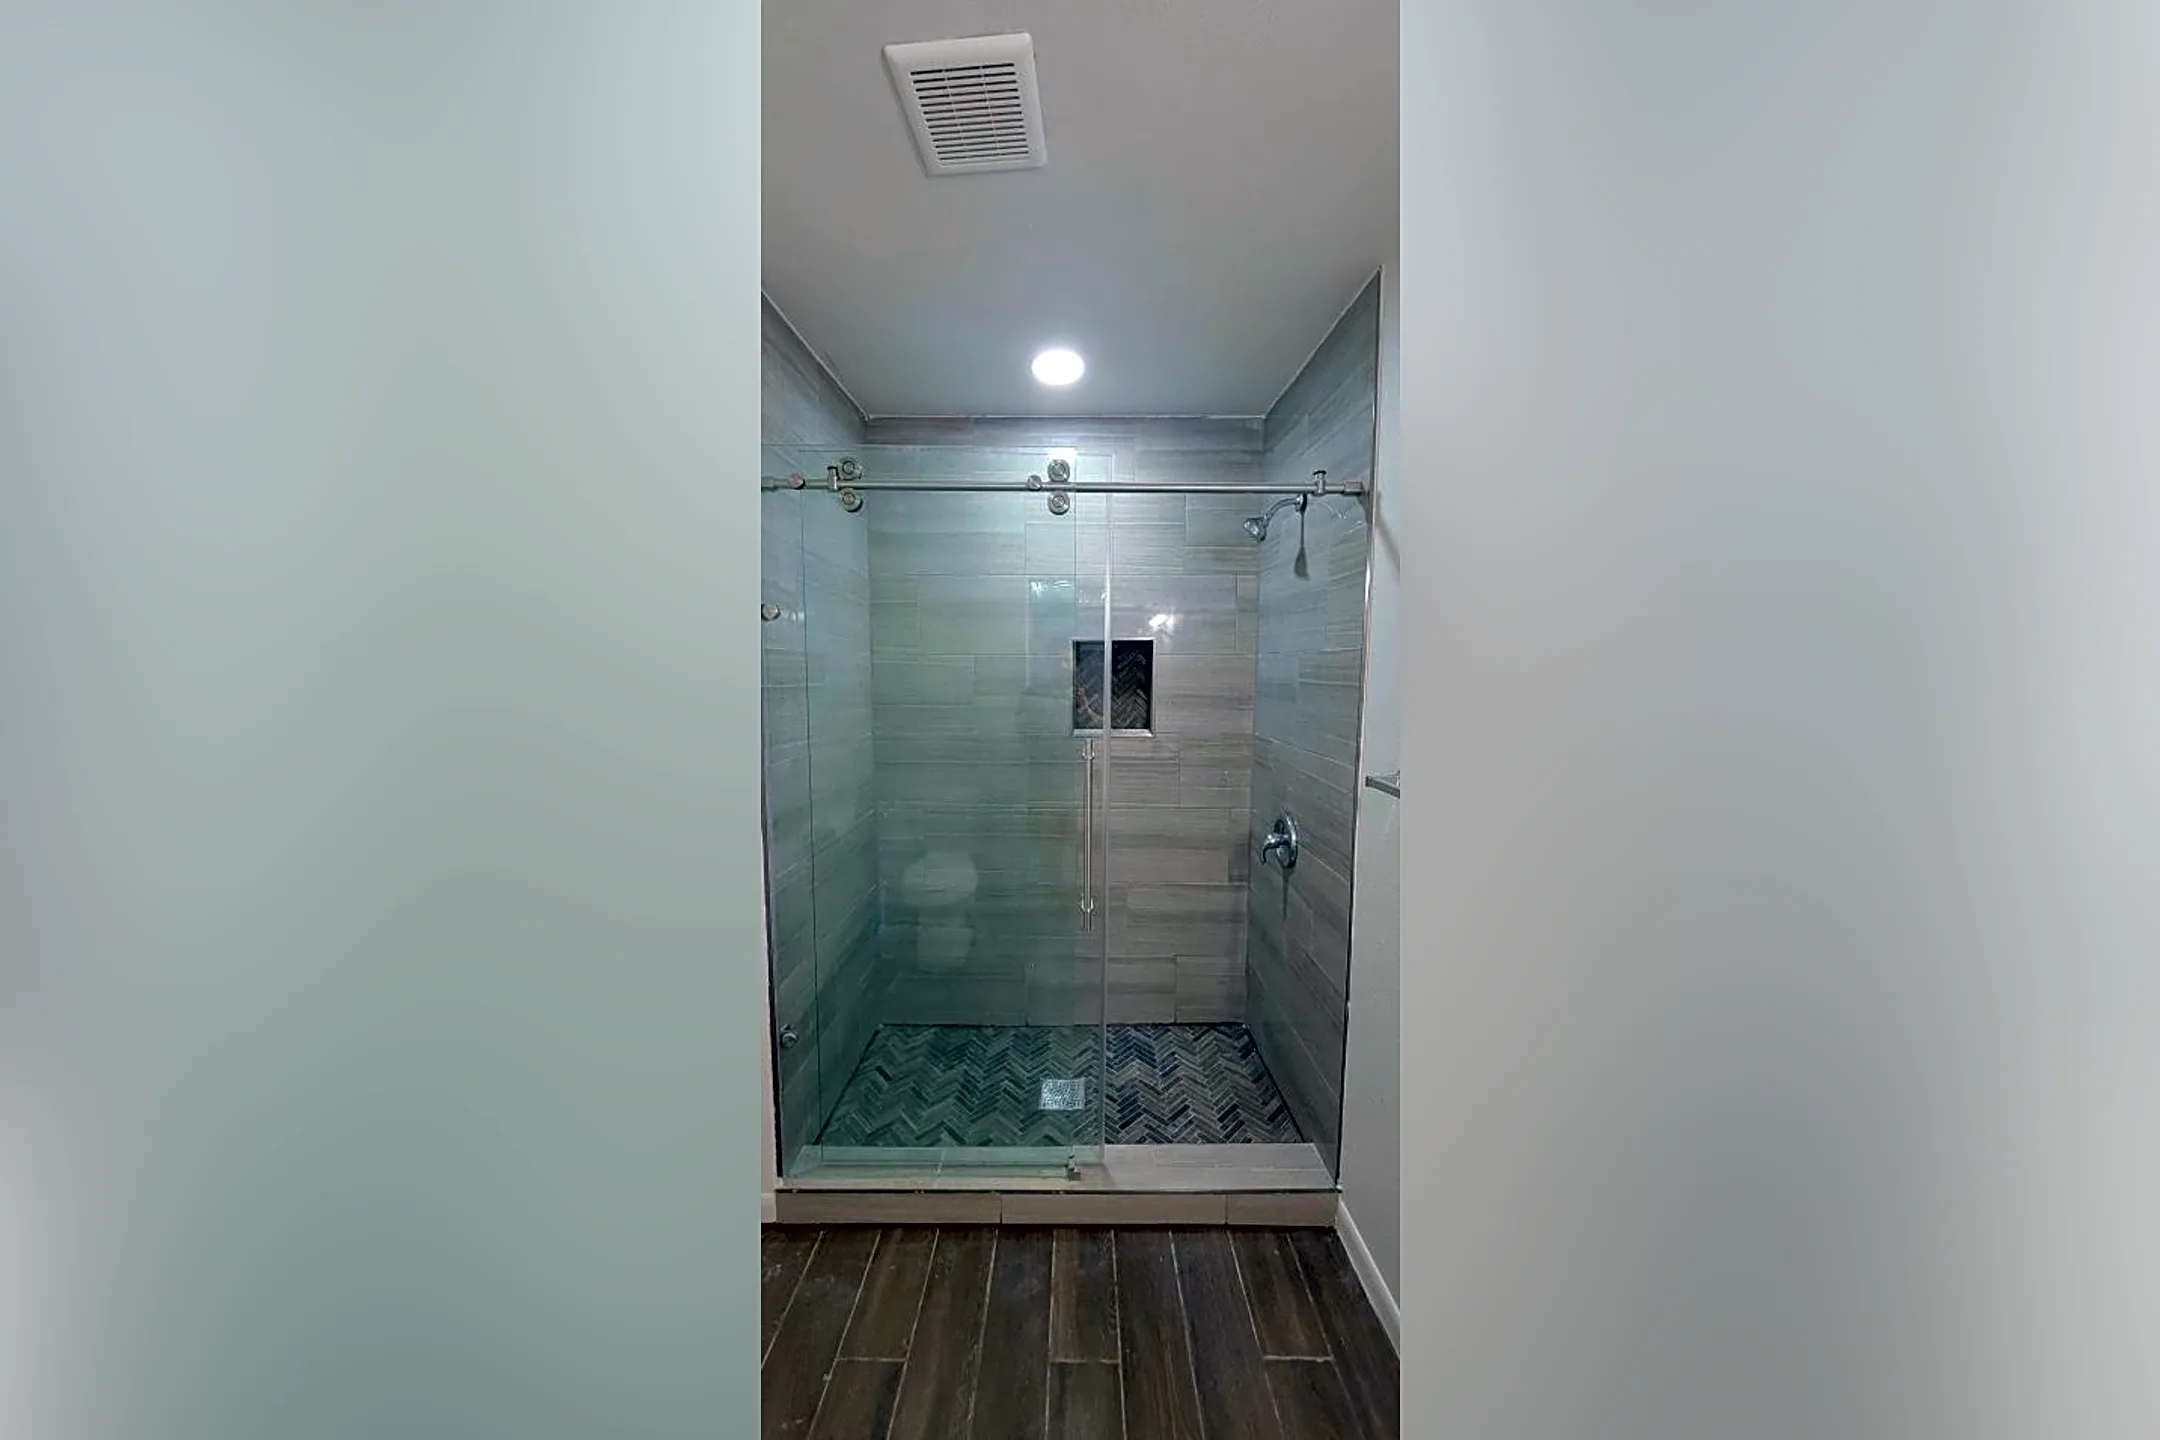 Bathroom - Room For Rent - Fort Worth, TX